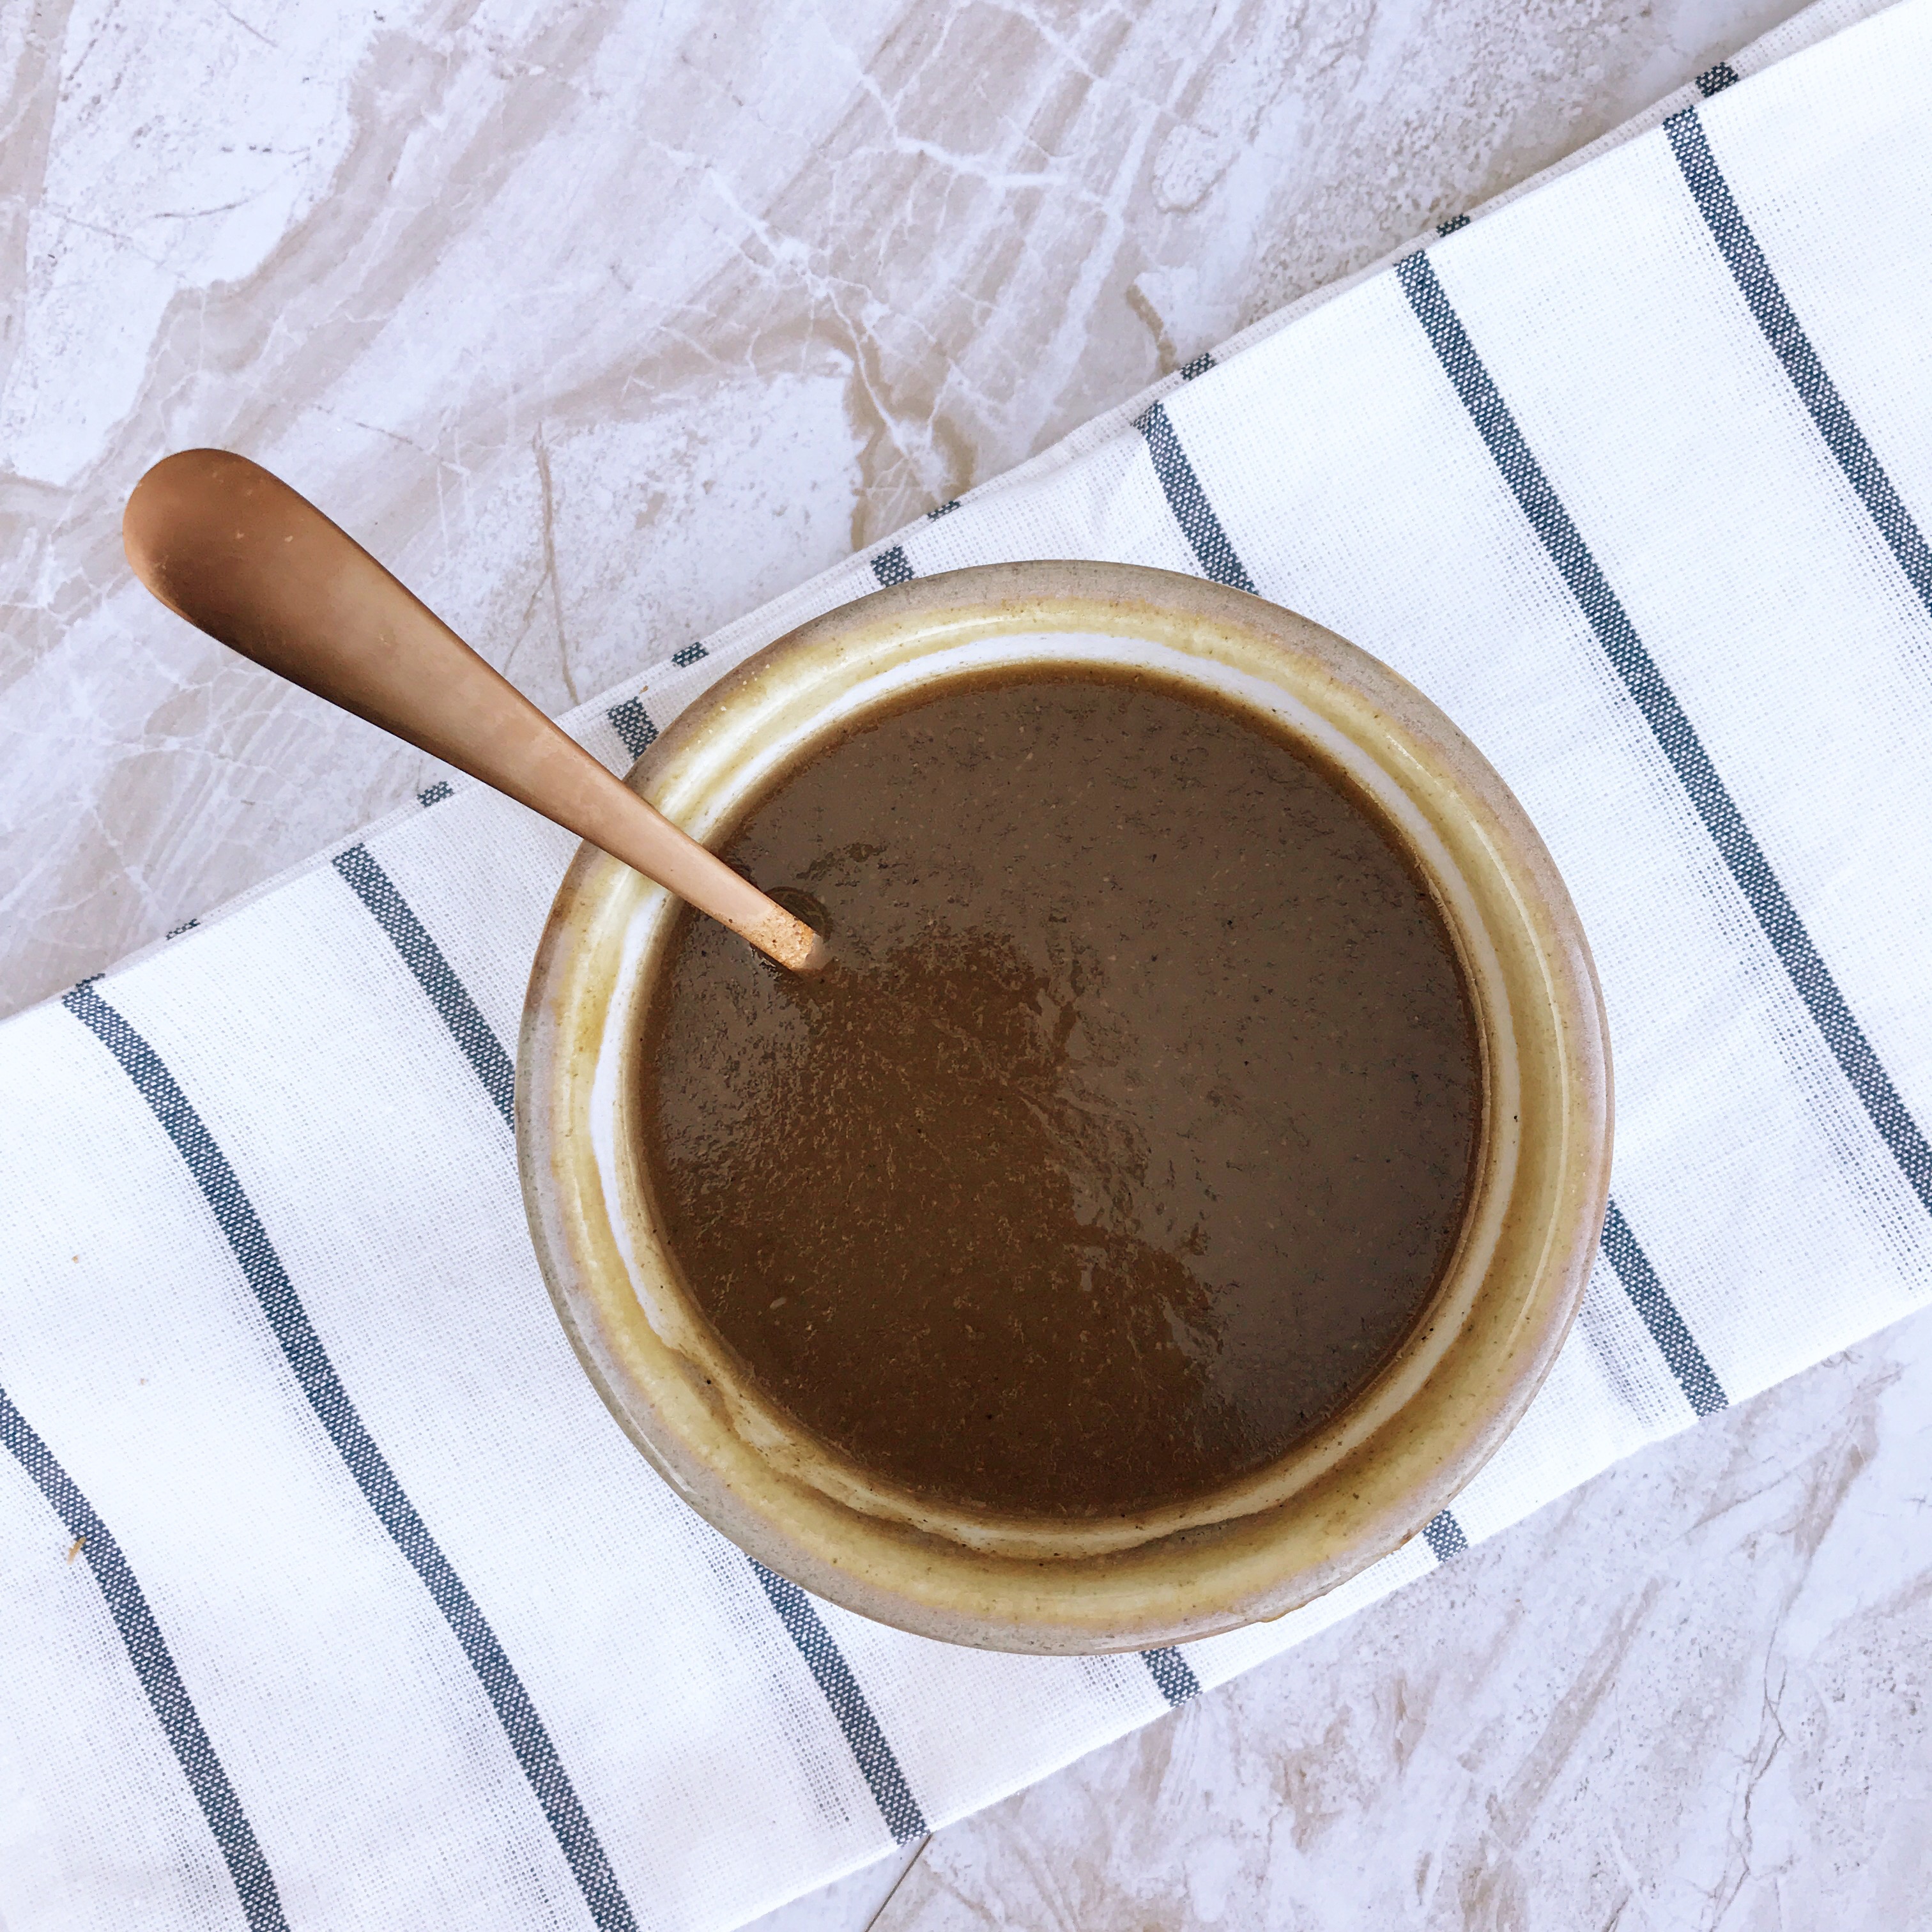 Learning how to make your own gravy from scratch